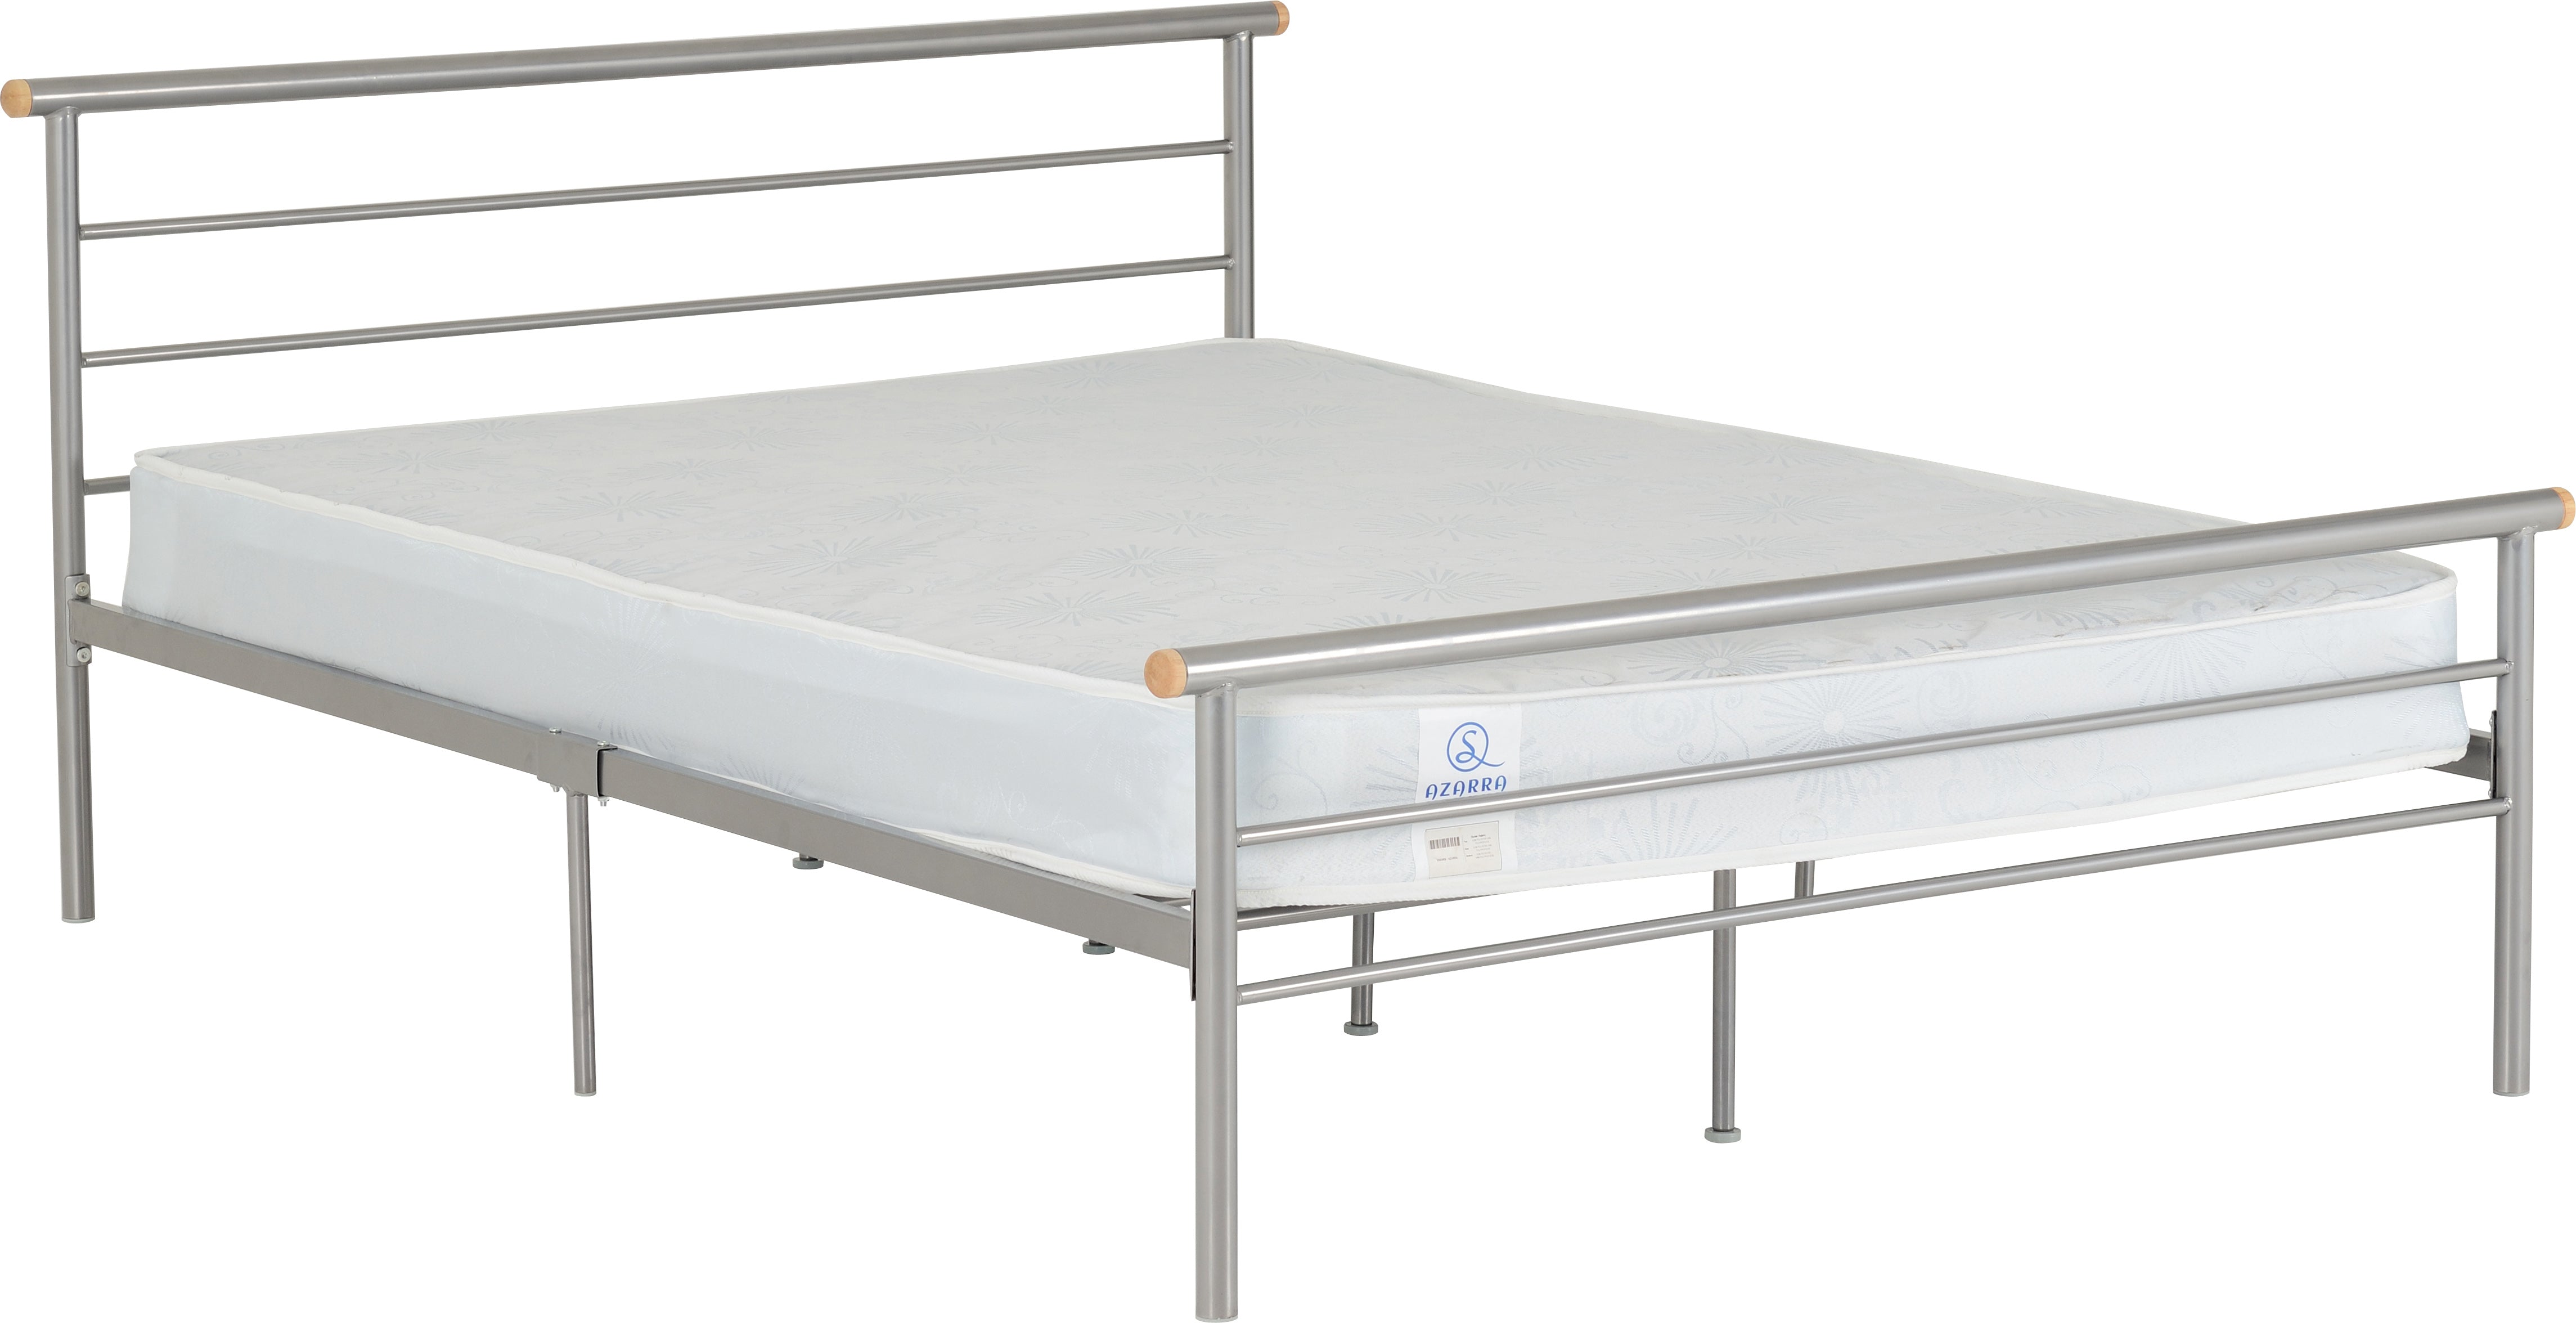 4 6 double bed